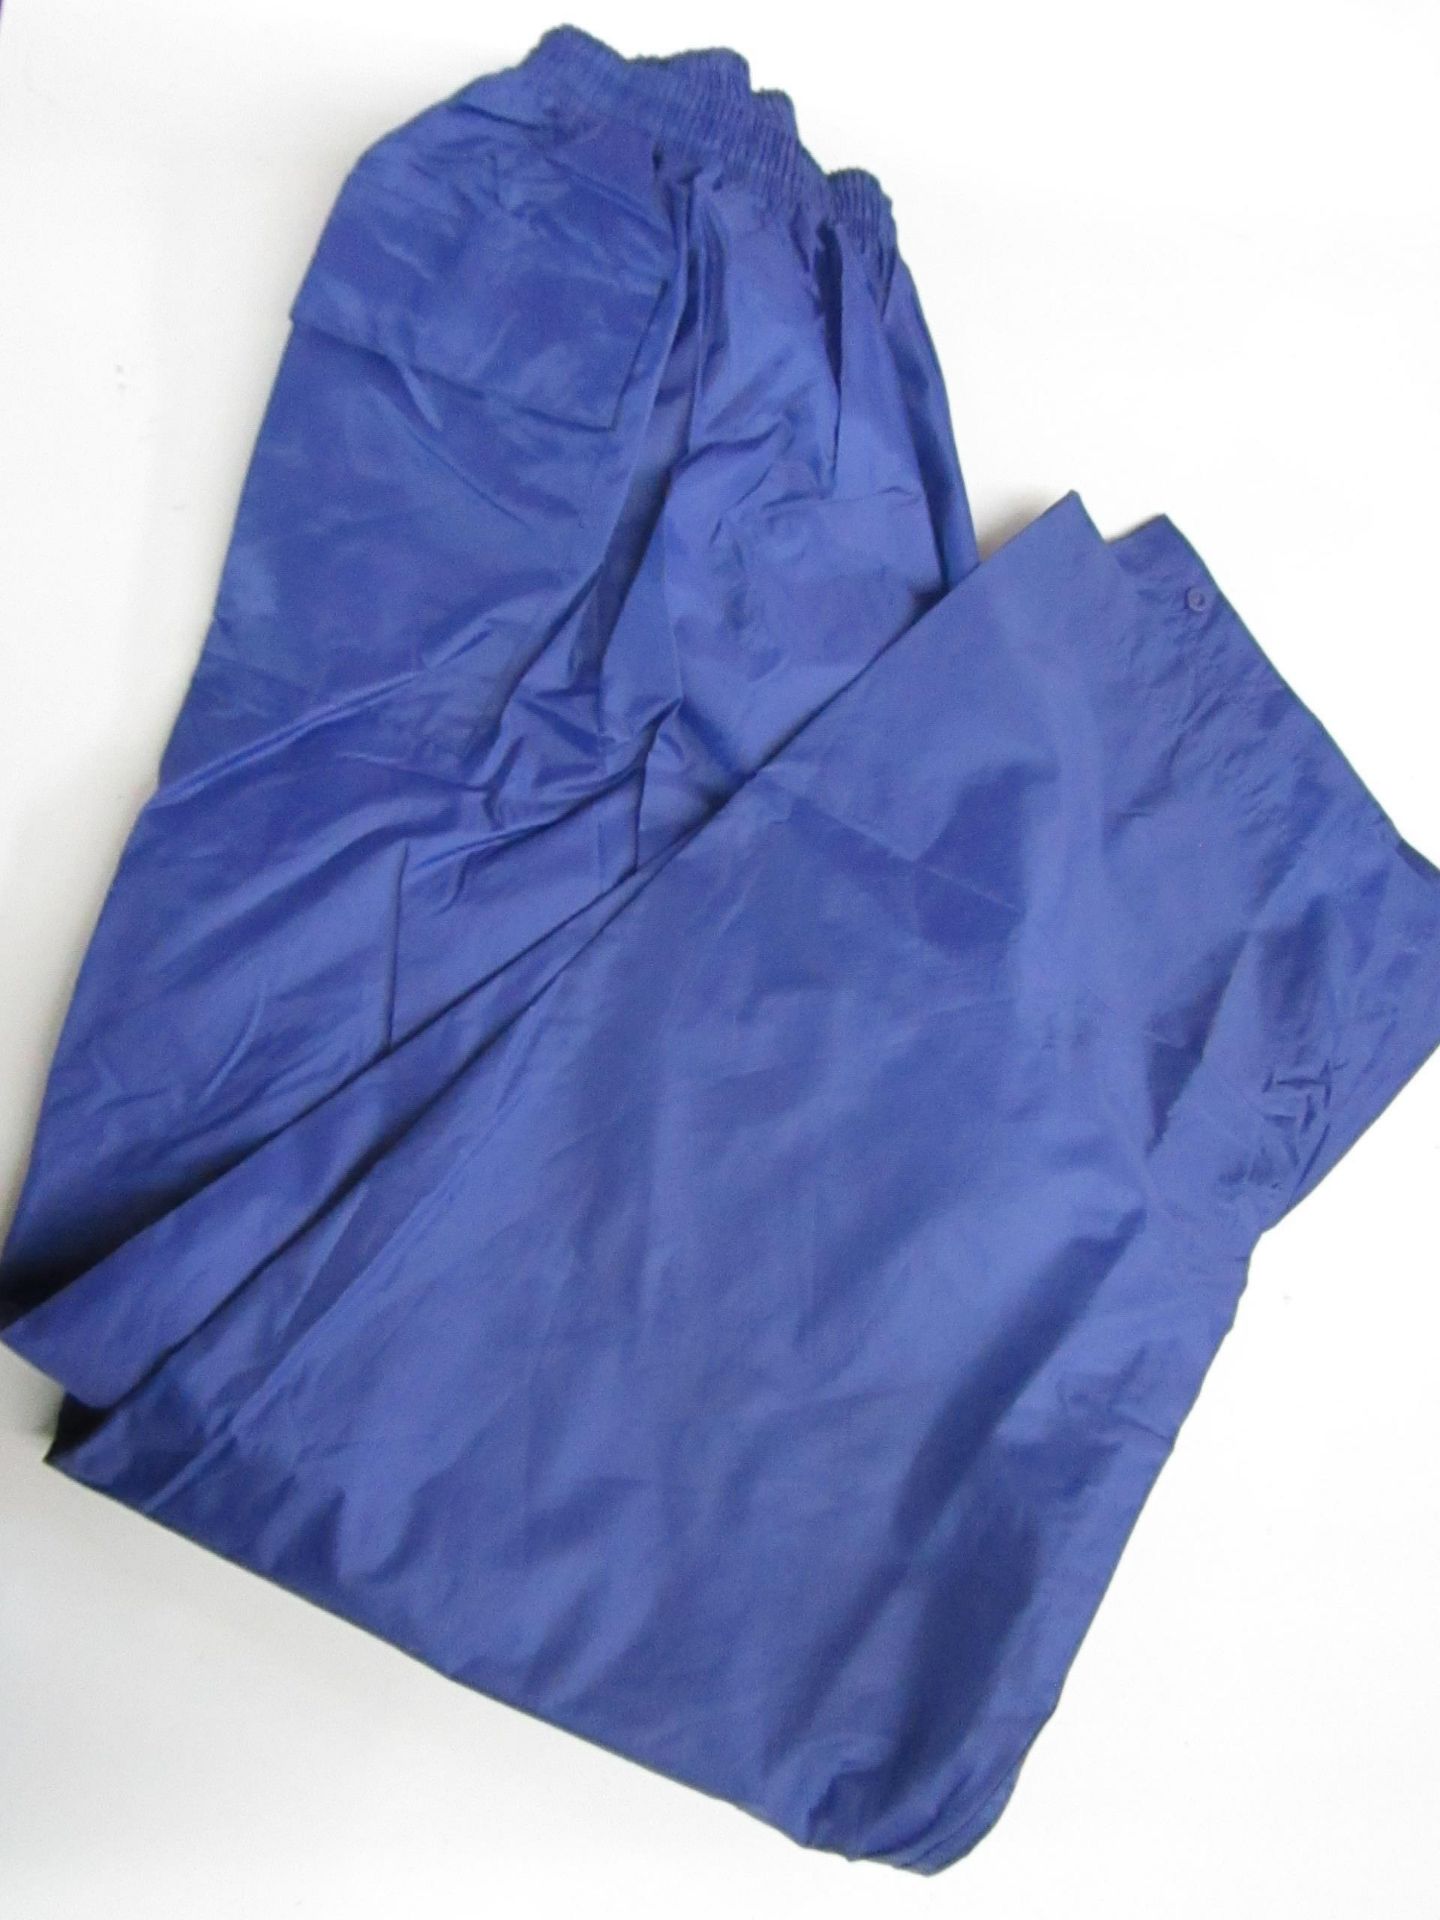 11 X Pairs of Adult Waterproof Pants With Pocket & Velcro Adjustable Leg Zip on The Front Side